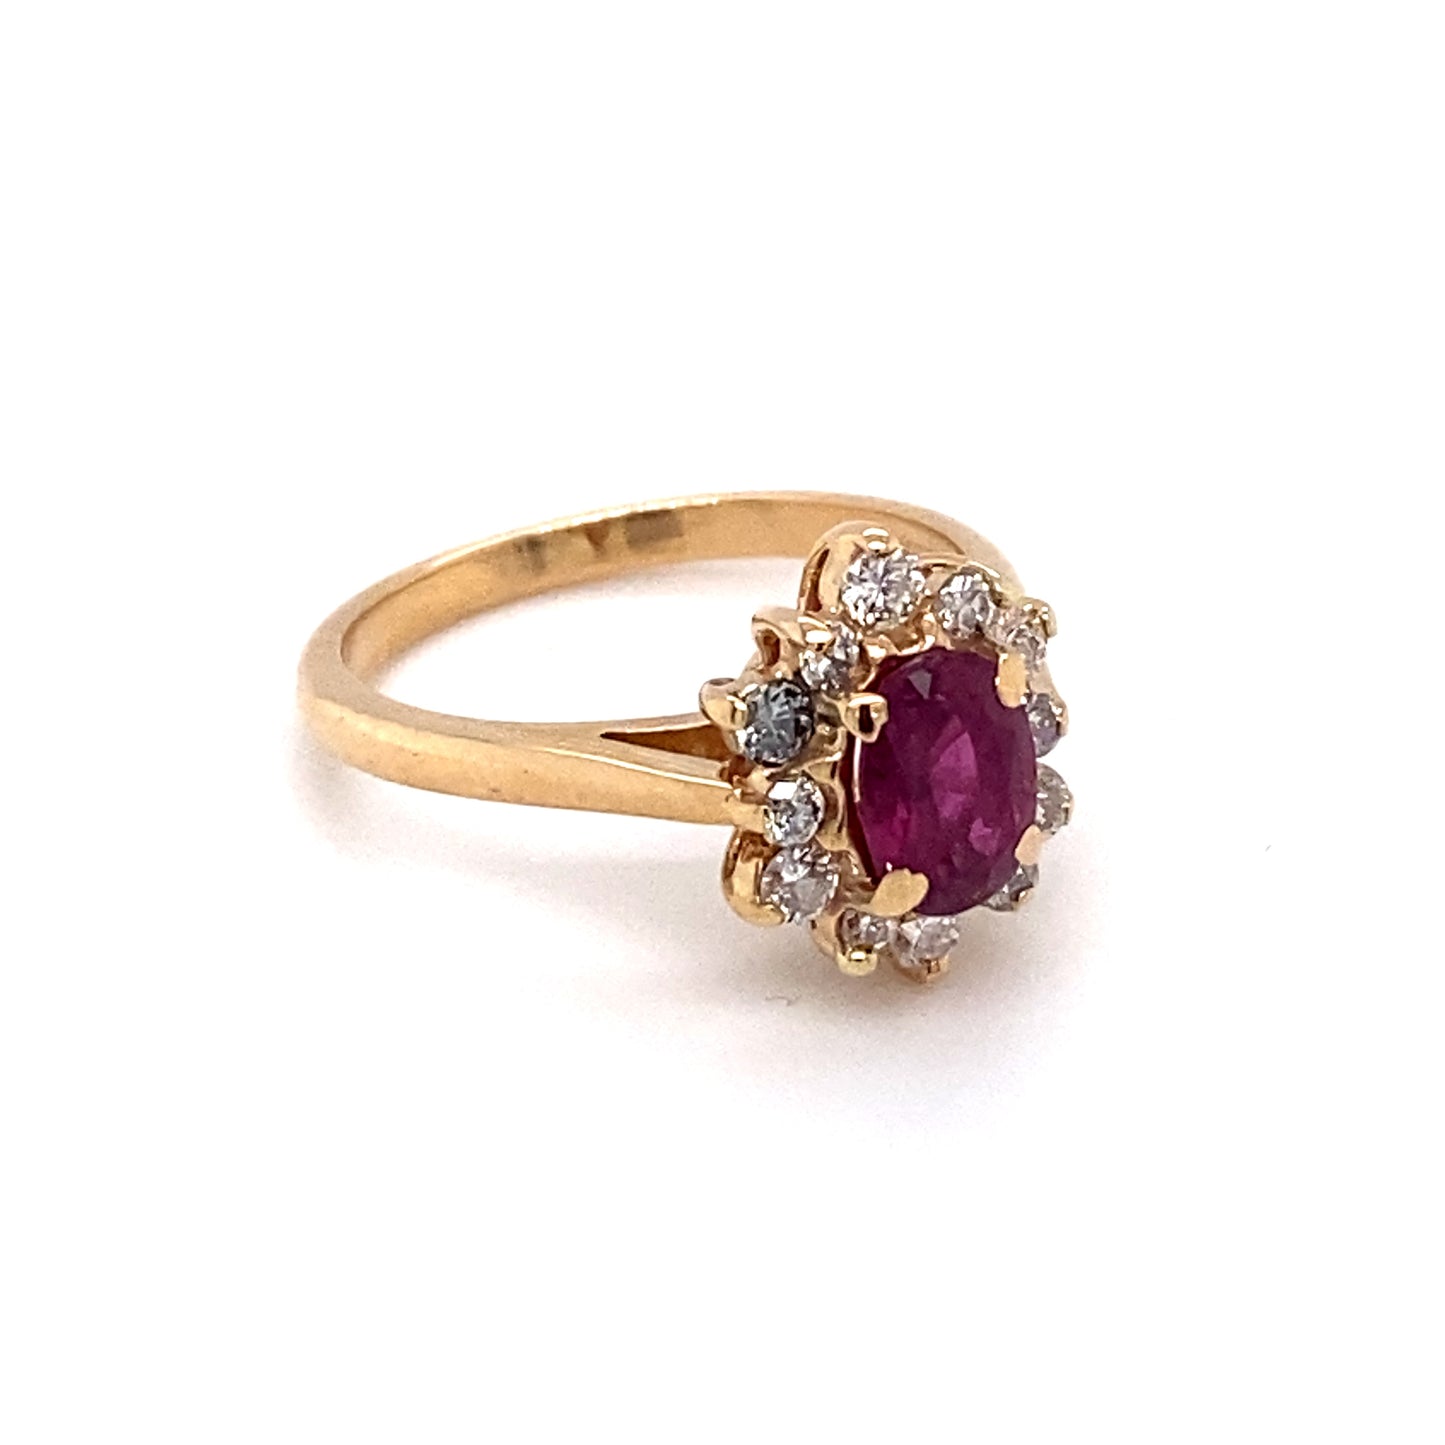 Circa 1960 1 Carat Oval Ruby and Diamond Ring in 14K Gold